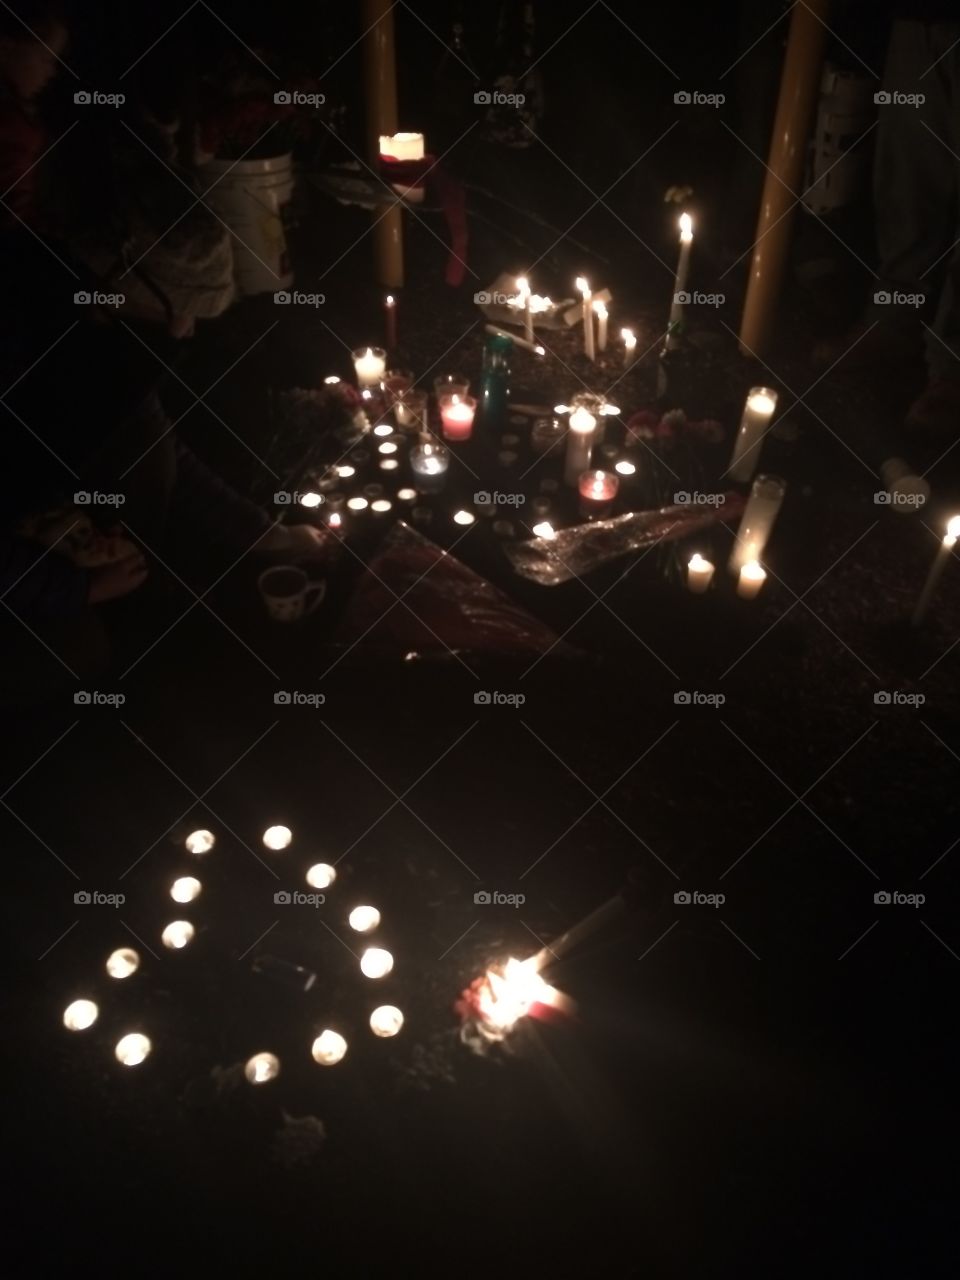 A candlelight vigil for a dear friend who committed suicide in the winter of 2016